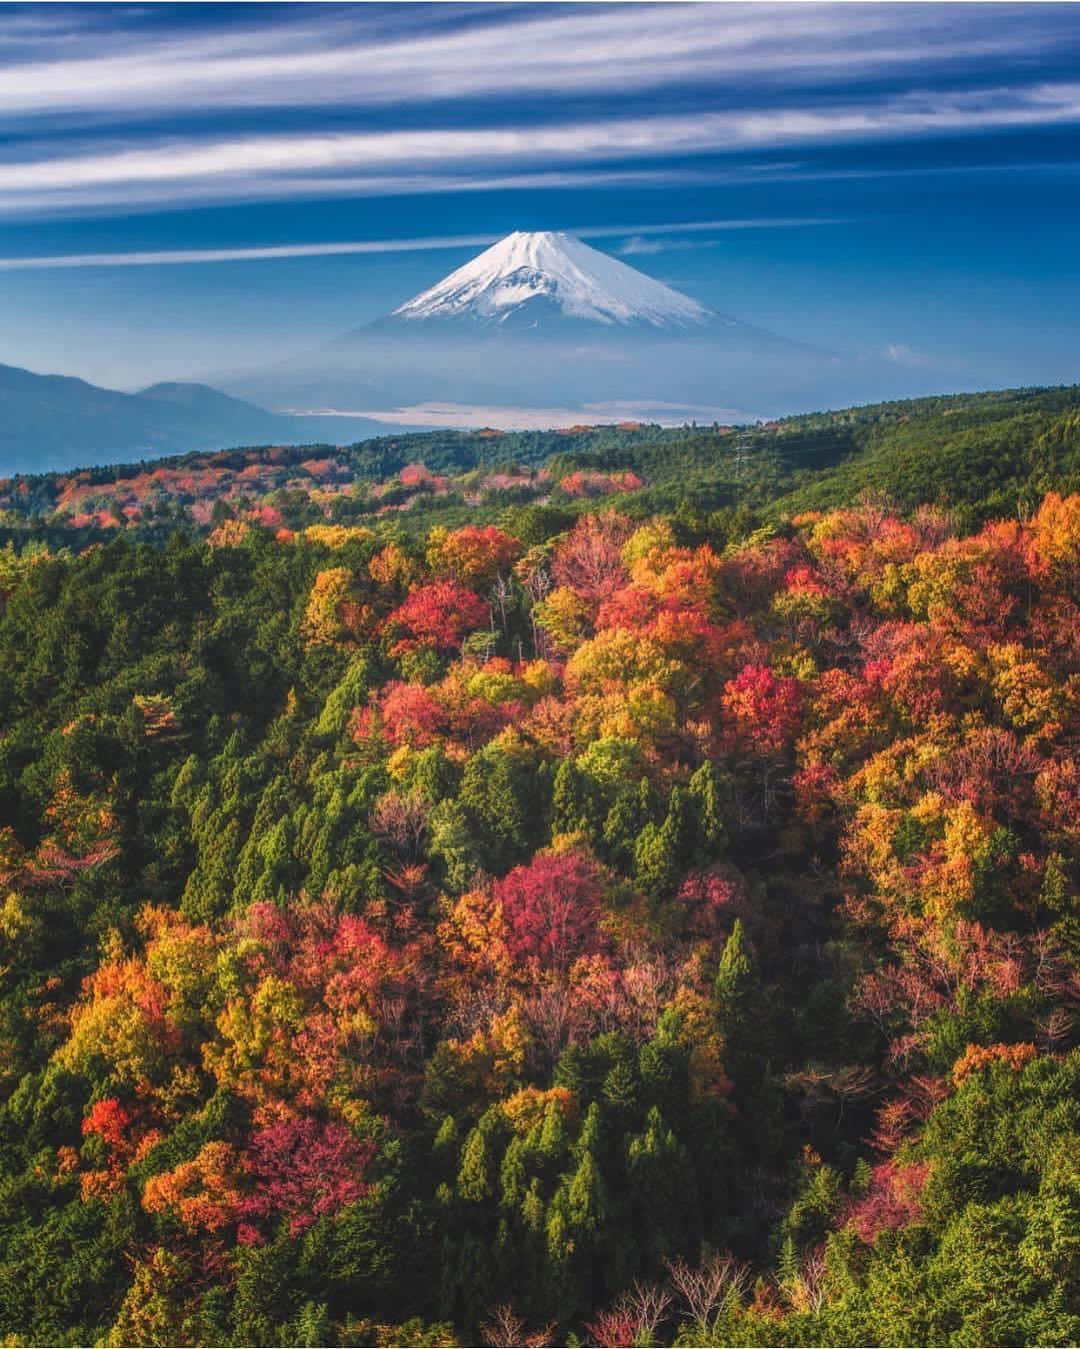 Majestic Mountain View of the Iconic Mount Fuji in Japan